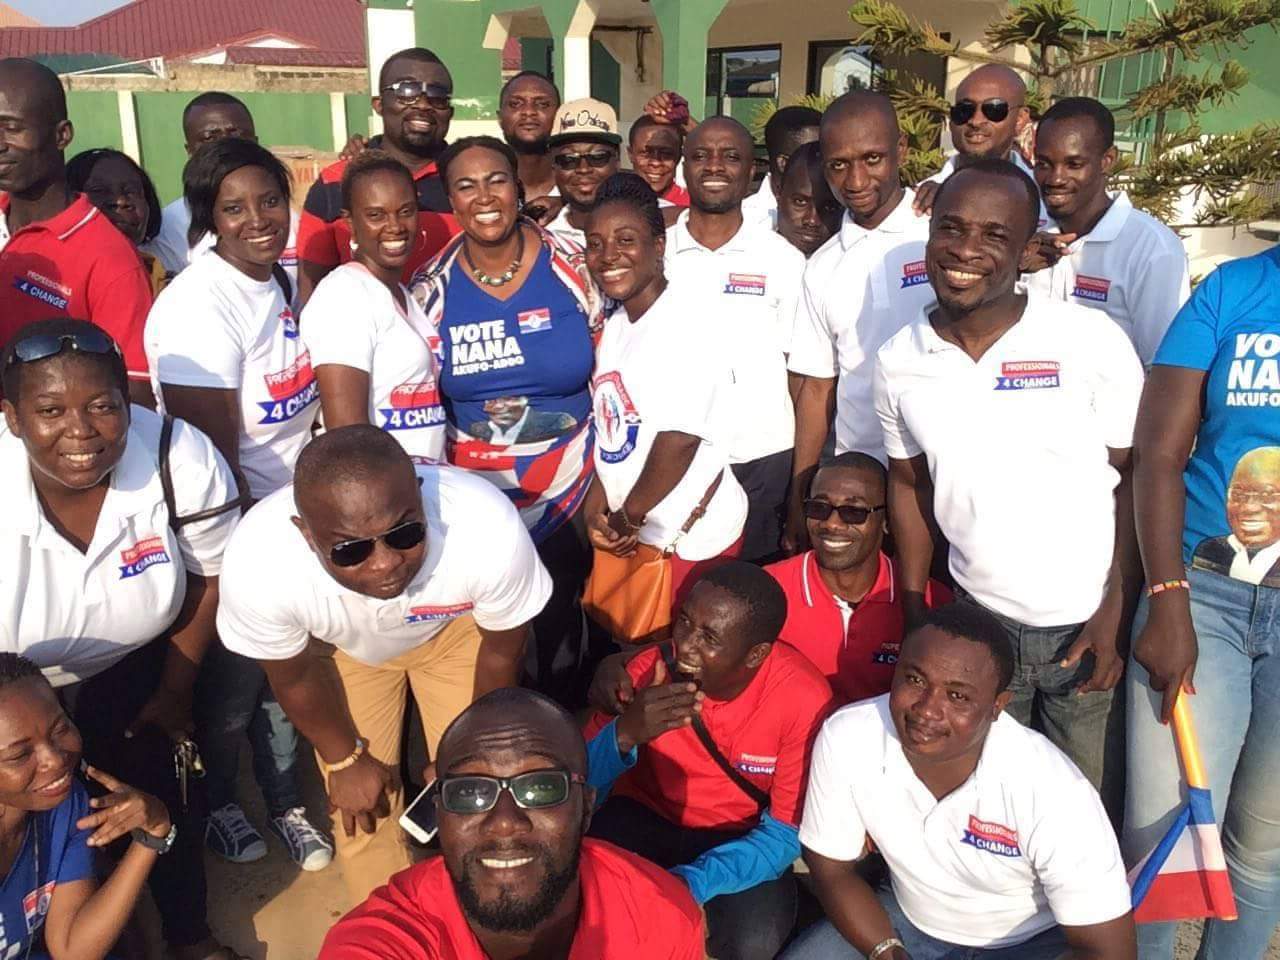 Professionals for Change campaign for Akufo-Addo